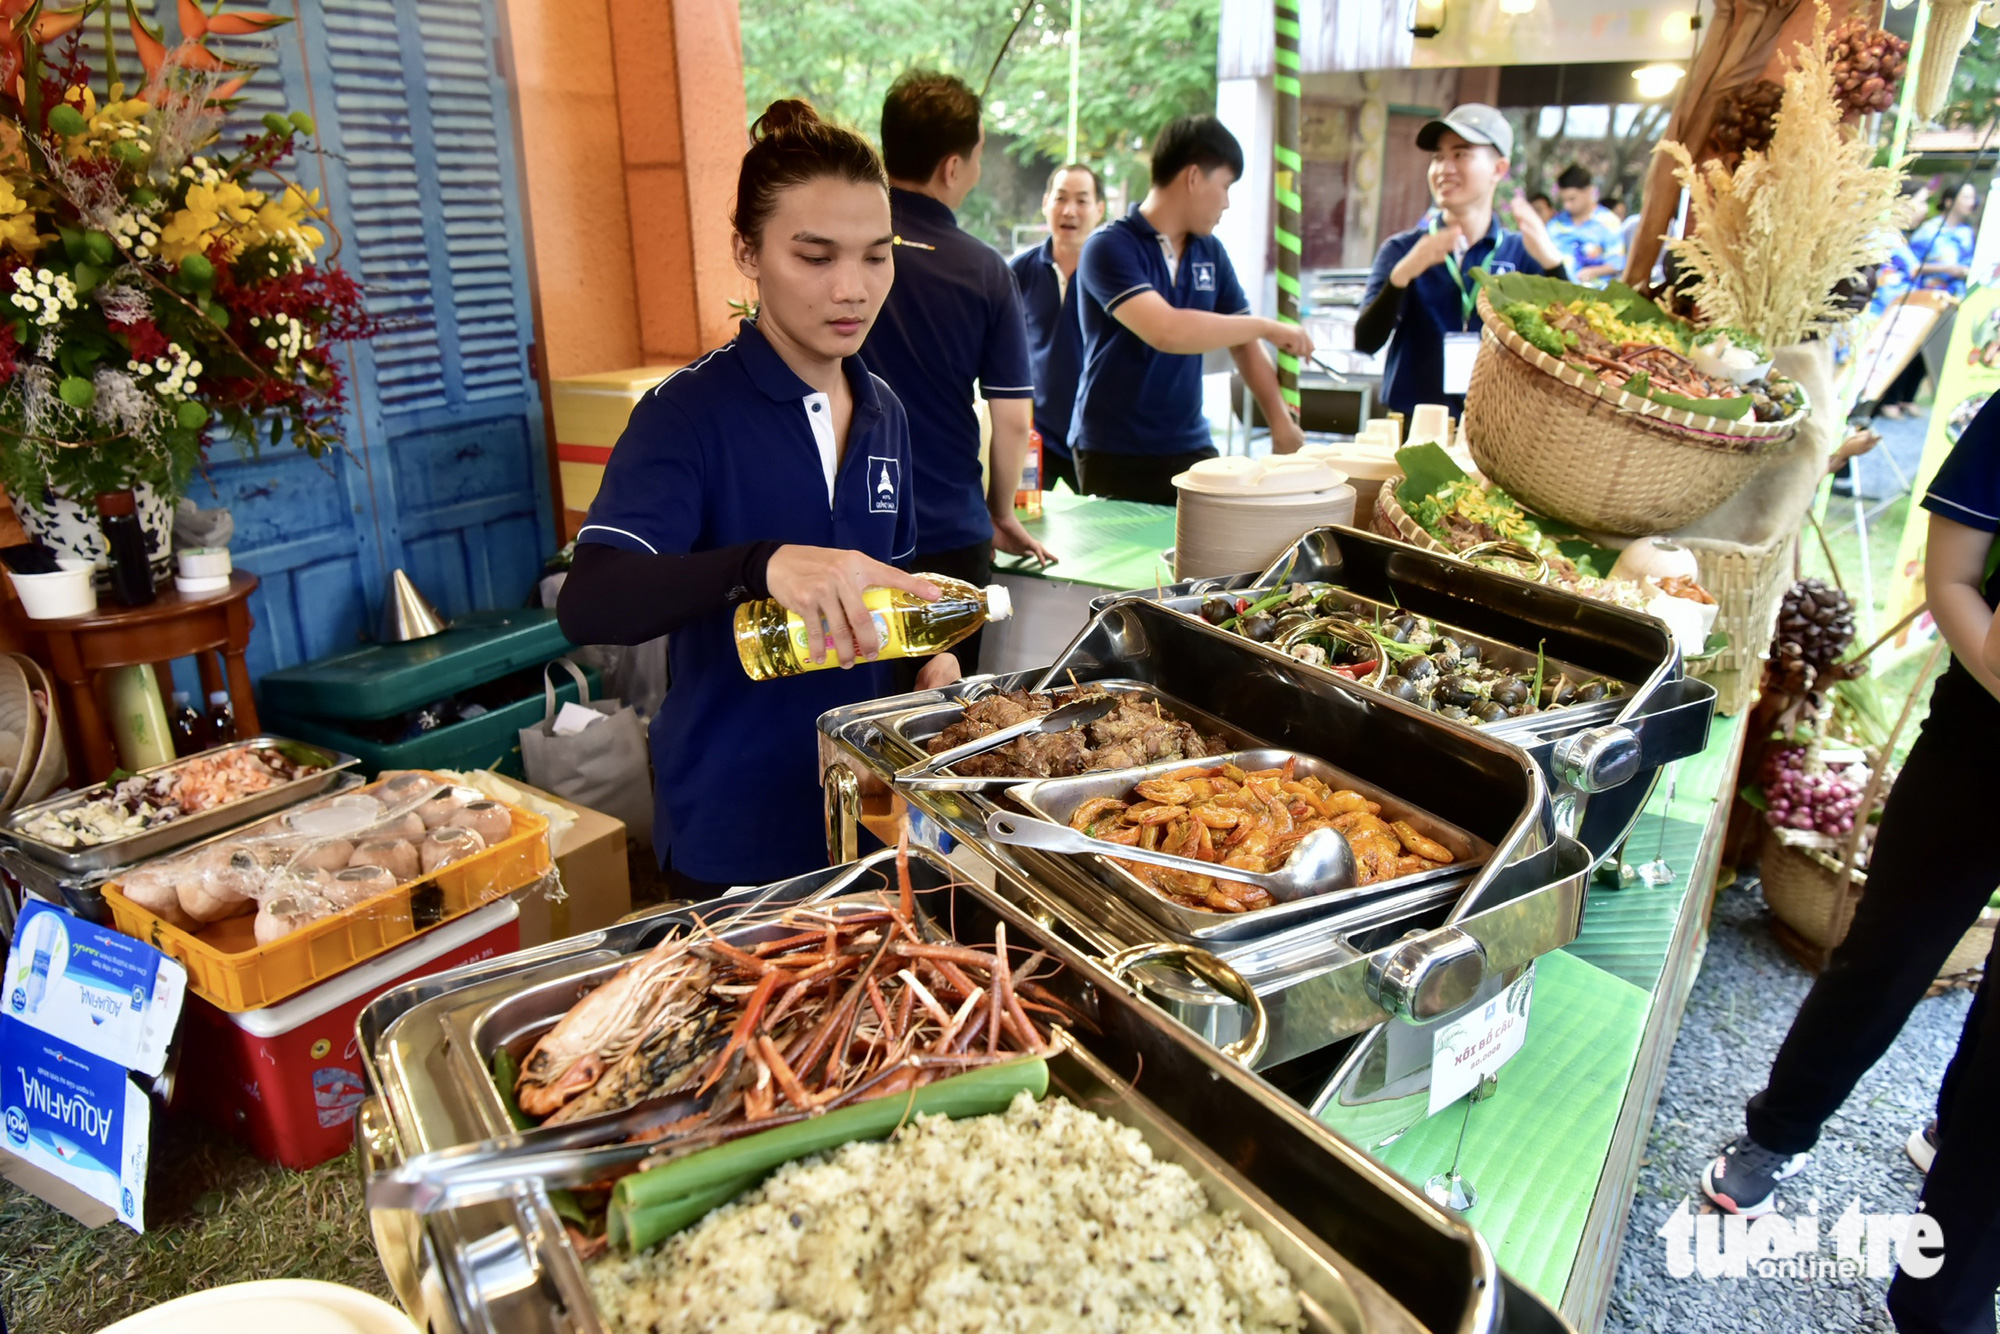 A cook prepares food at a Mekong Delta cuisine stall at the opening of the Saigontourist Group Food and Culture Festival 2023 at Van Thanh Tourist Site in Binh Thanh District, Ho Chi Minh City on April 20, 2023. Photo: T.T.D. / Tuoi Tre